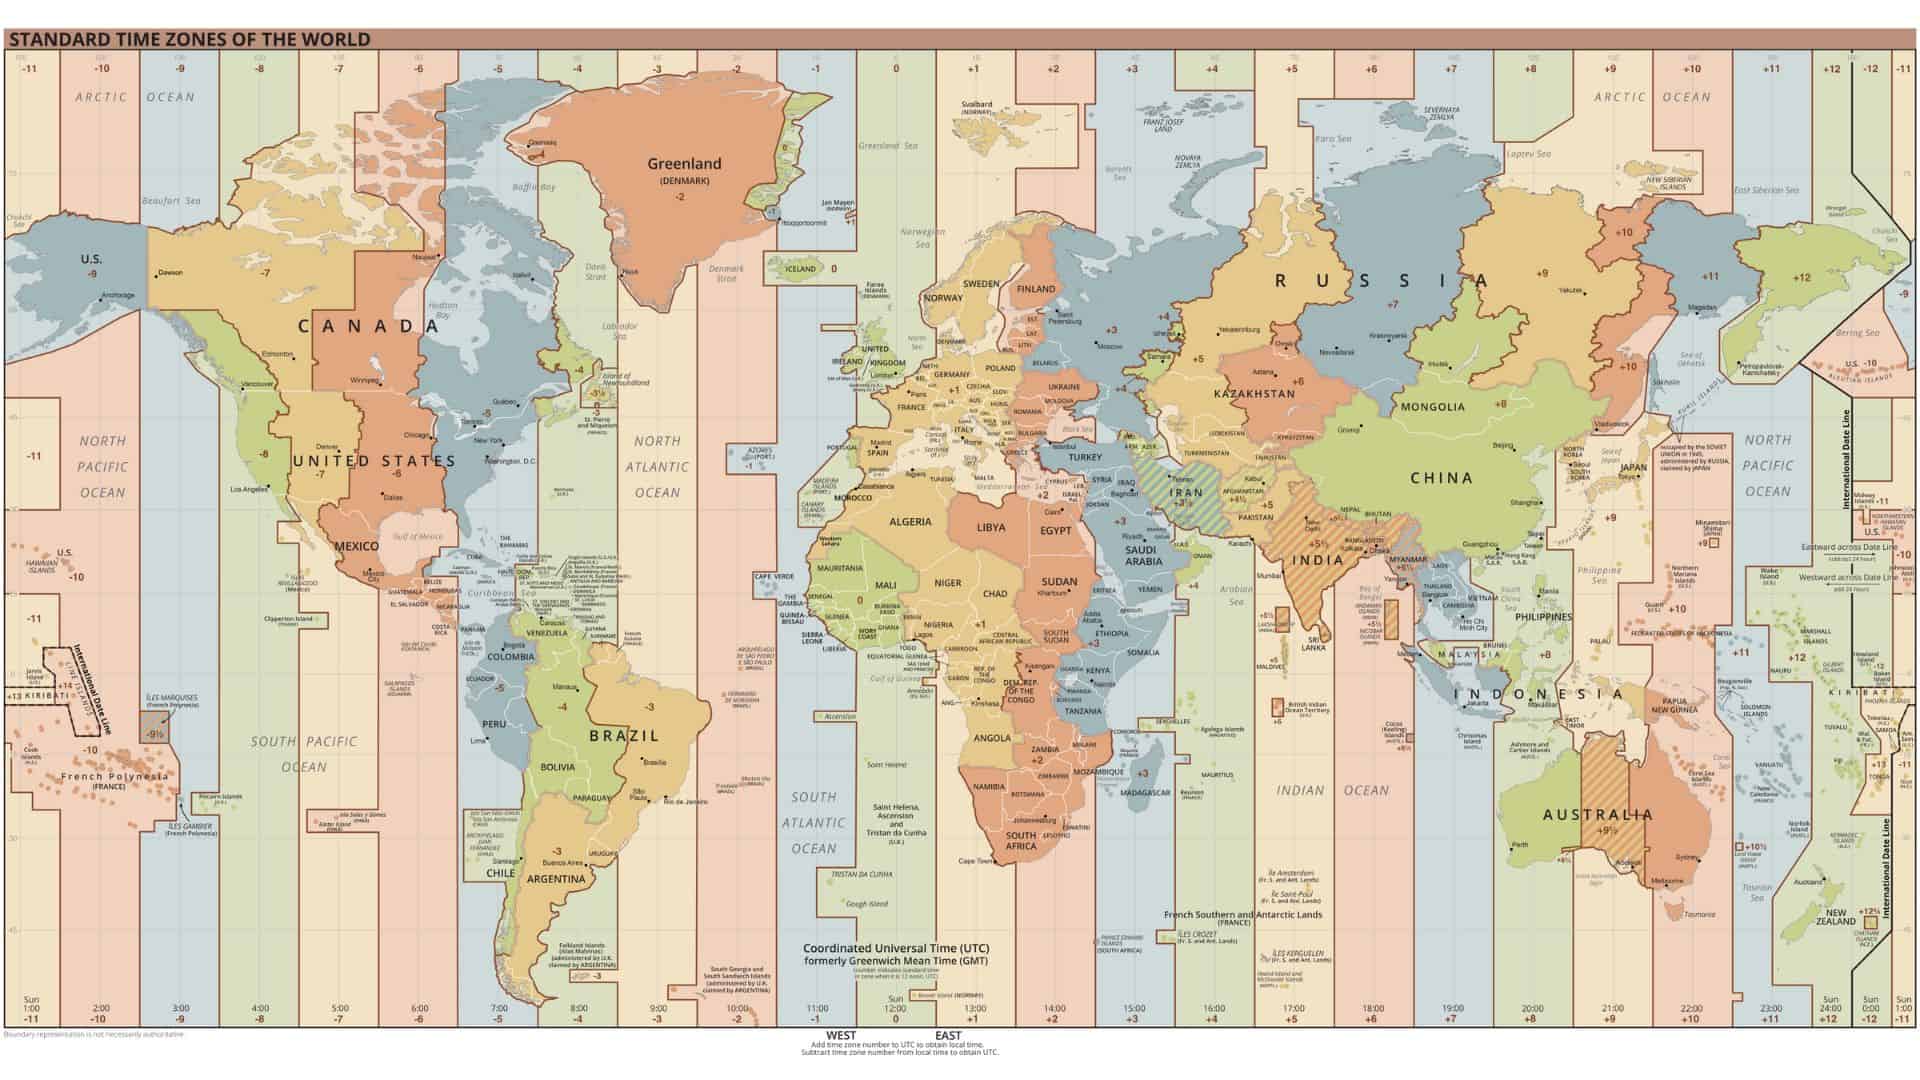 Time zones on the world map